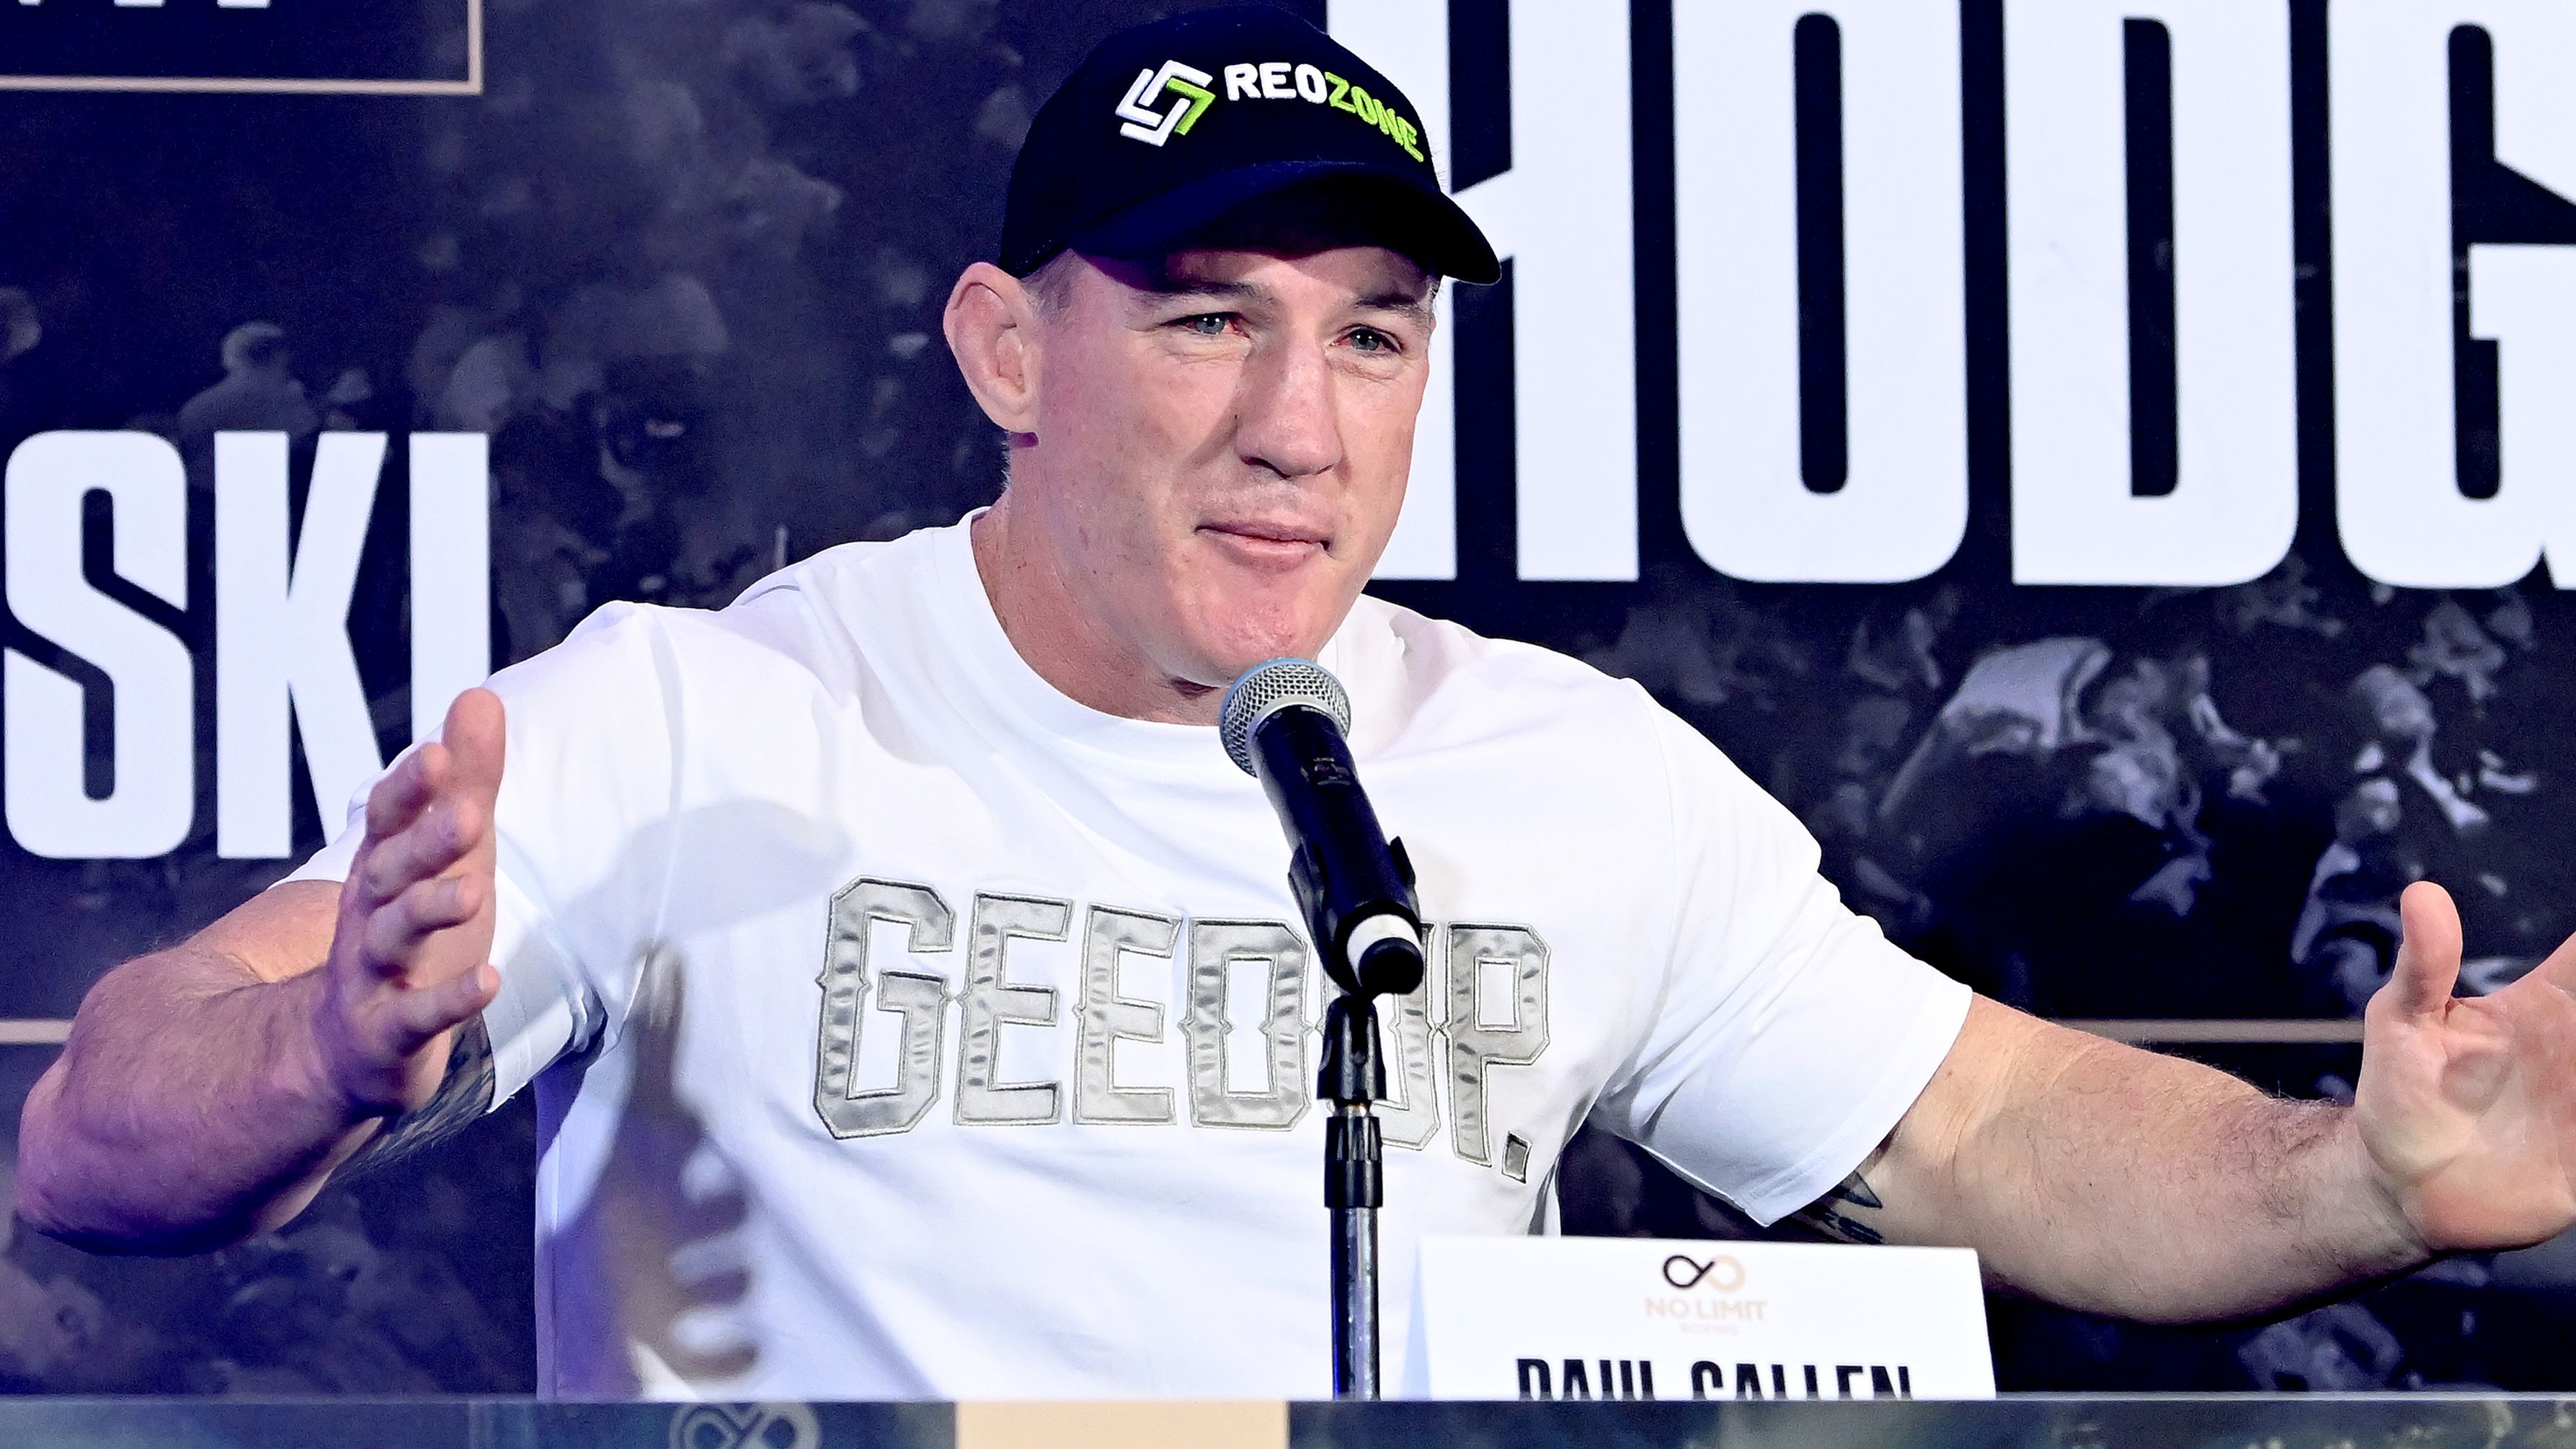 Paul Gallen speaks during a press conference announcing the fight against Justin Hodges and Ben Hannant.